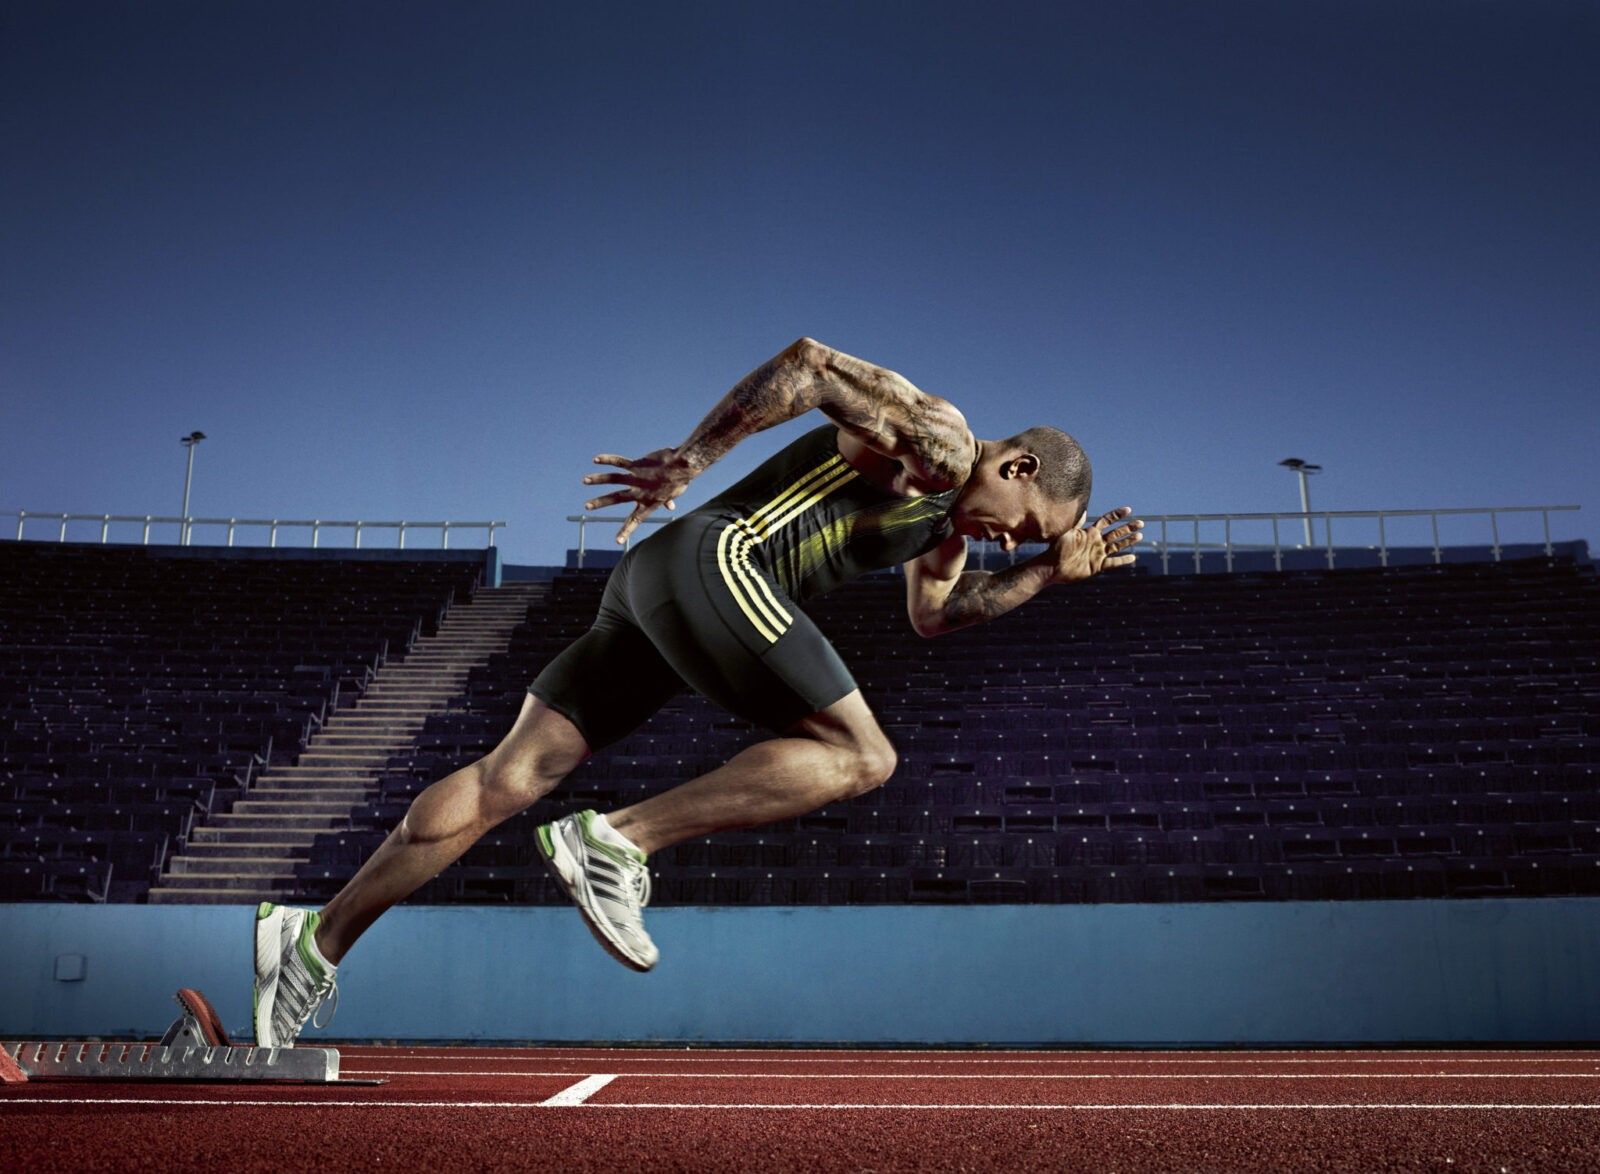 epic picture of athlete running - habits of professional athletes